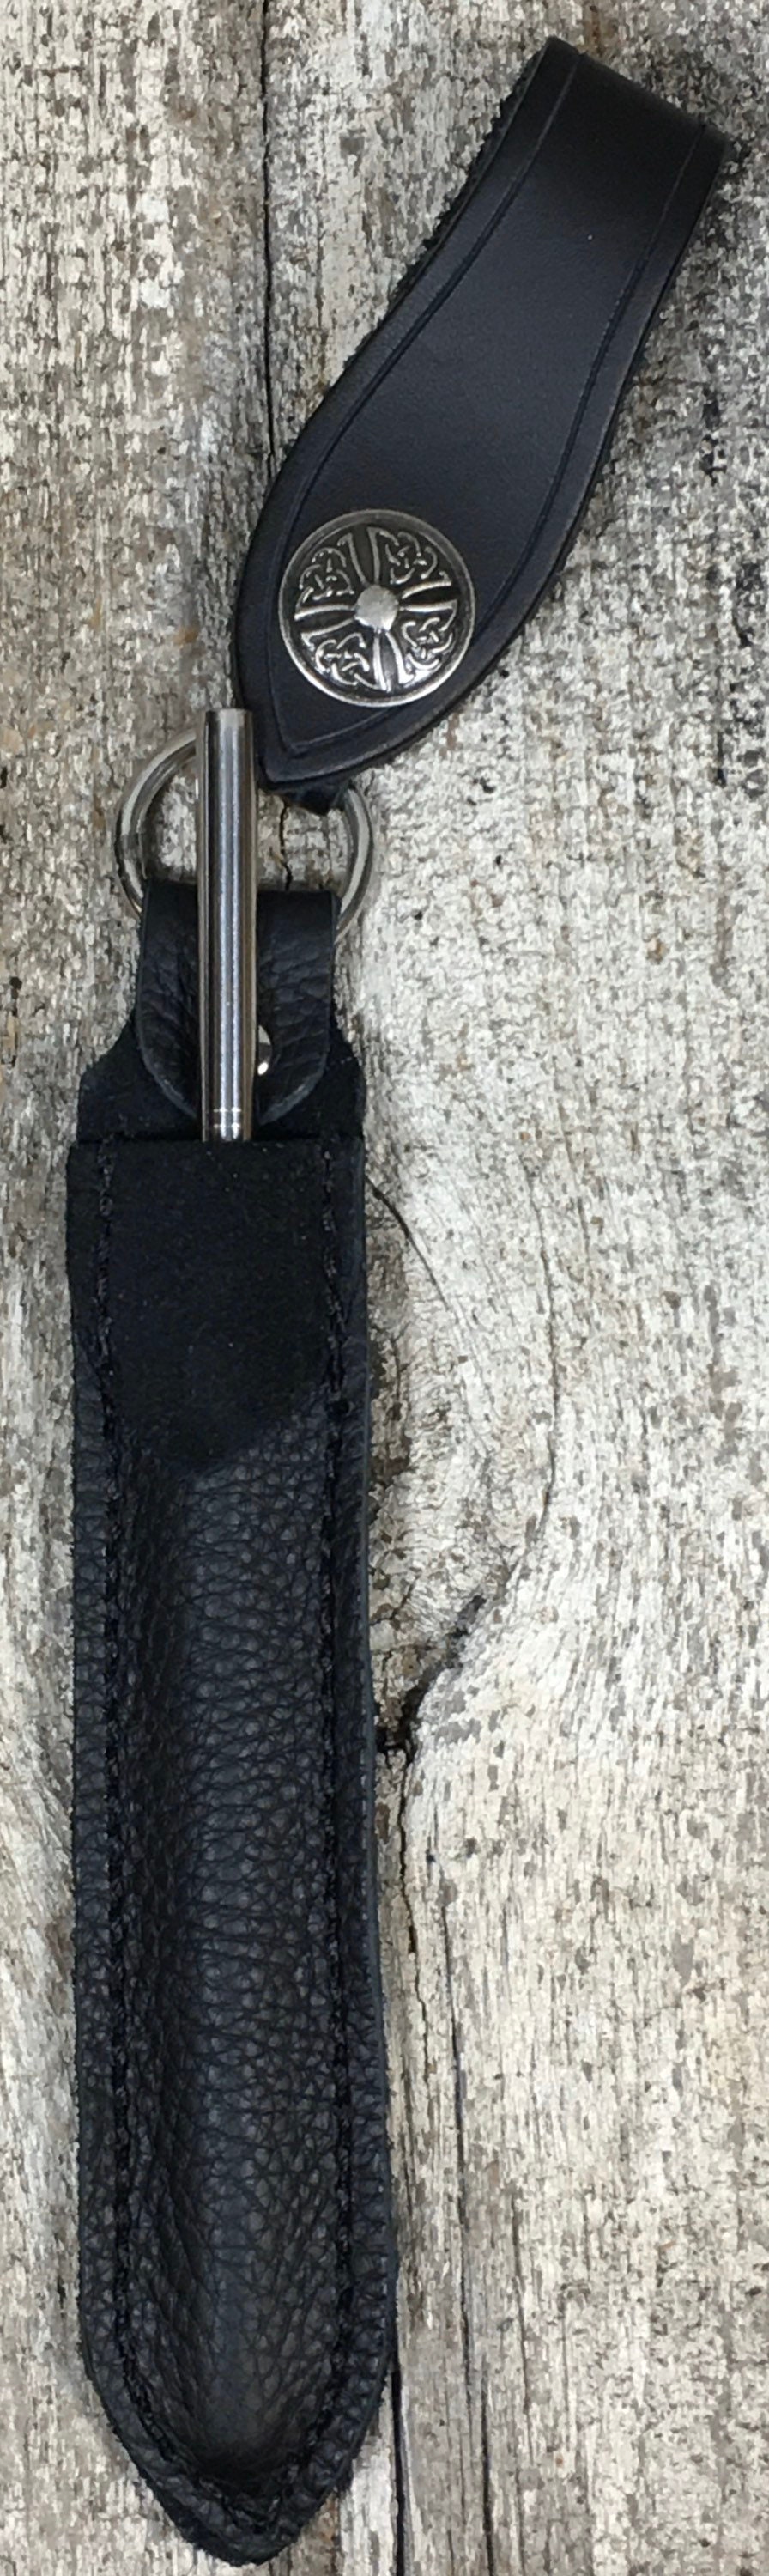 Leather straw holder, available with stainless steel straw